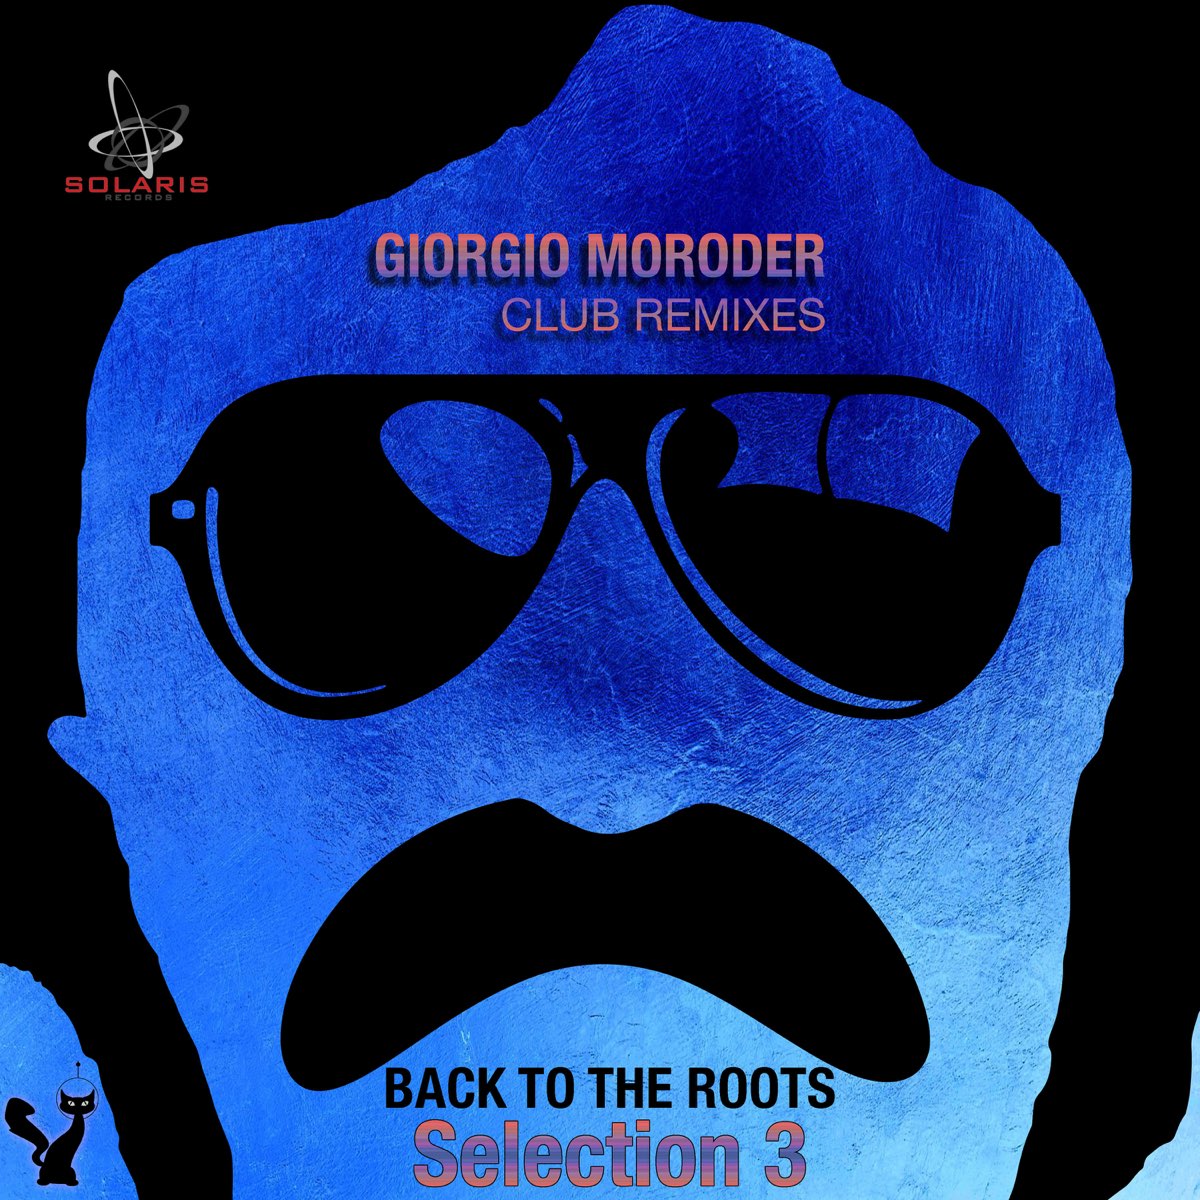 Giorgio Moroder Club Remixes Selection 3 - Back to the Roots ...